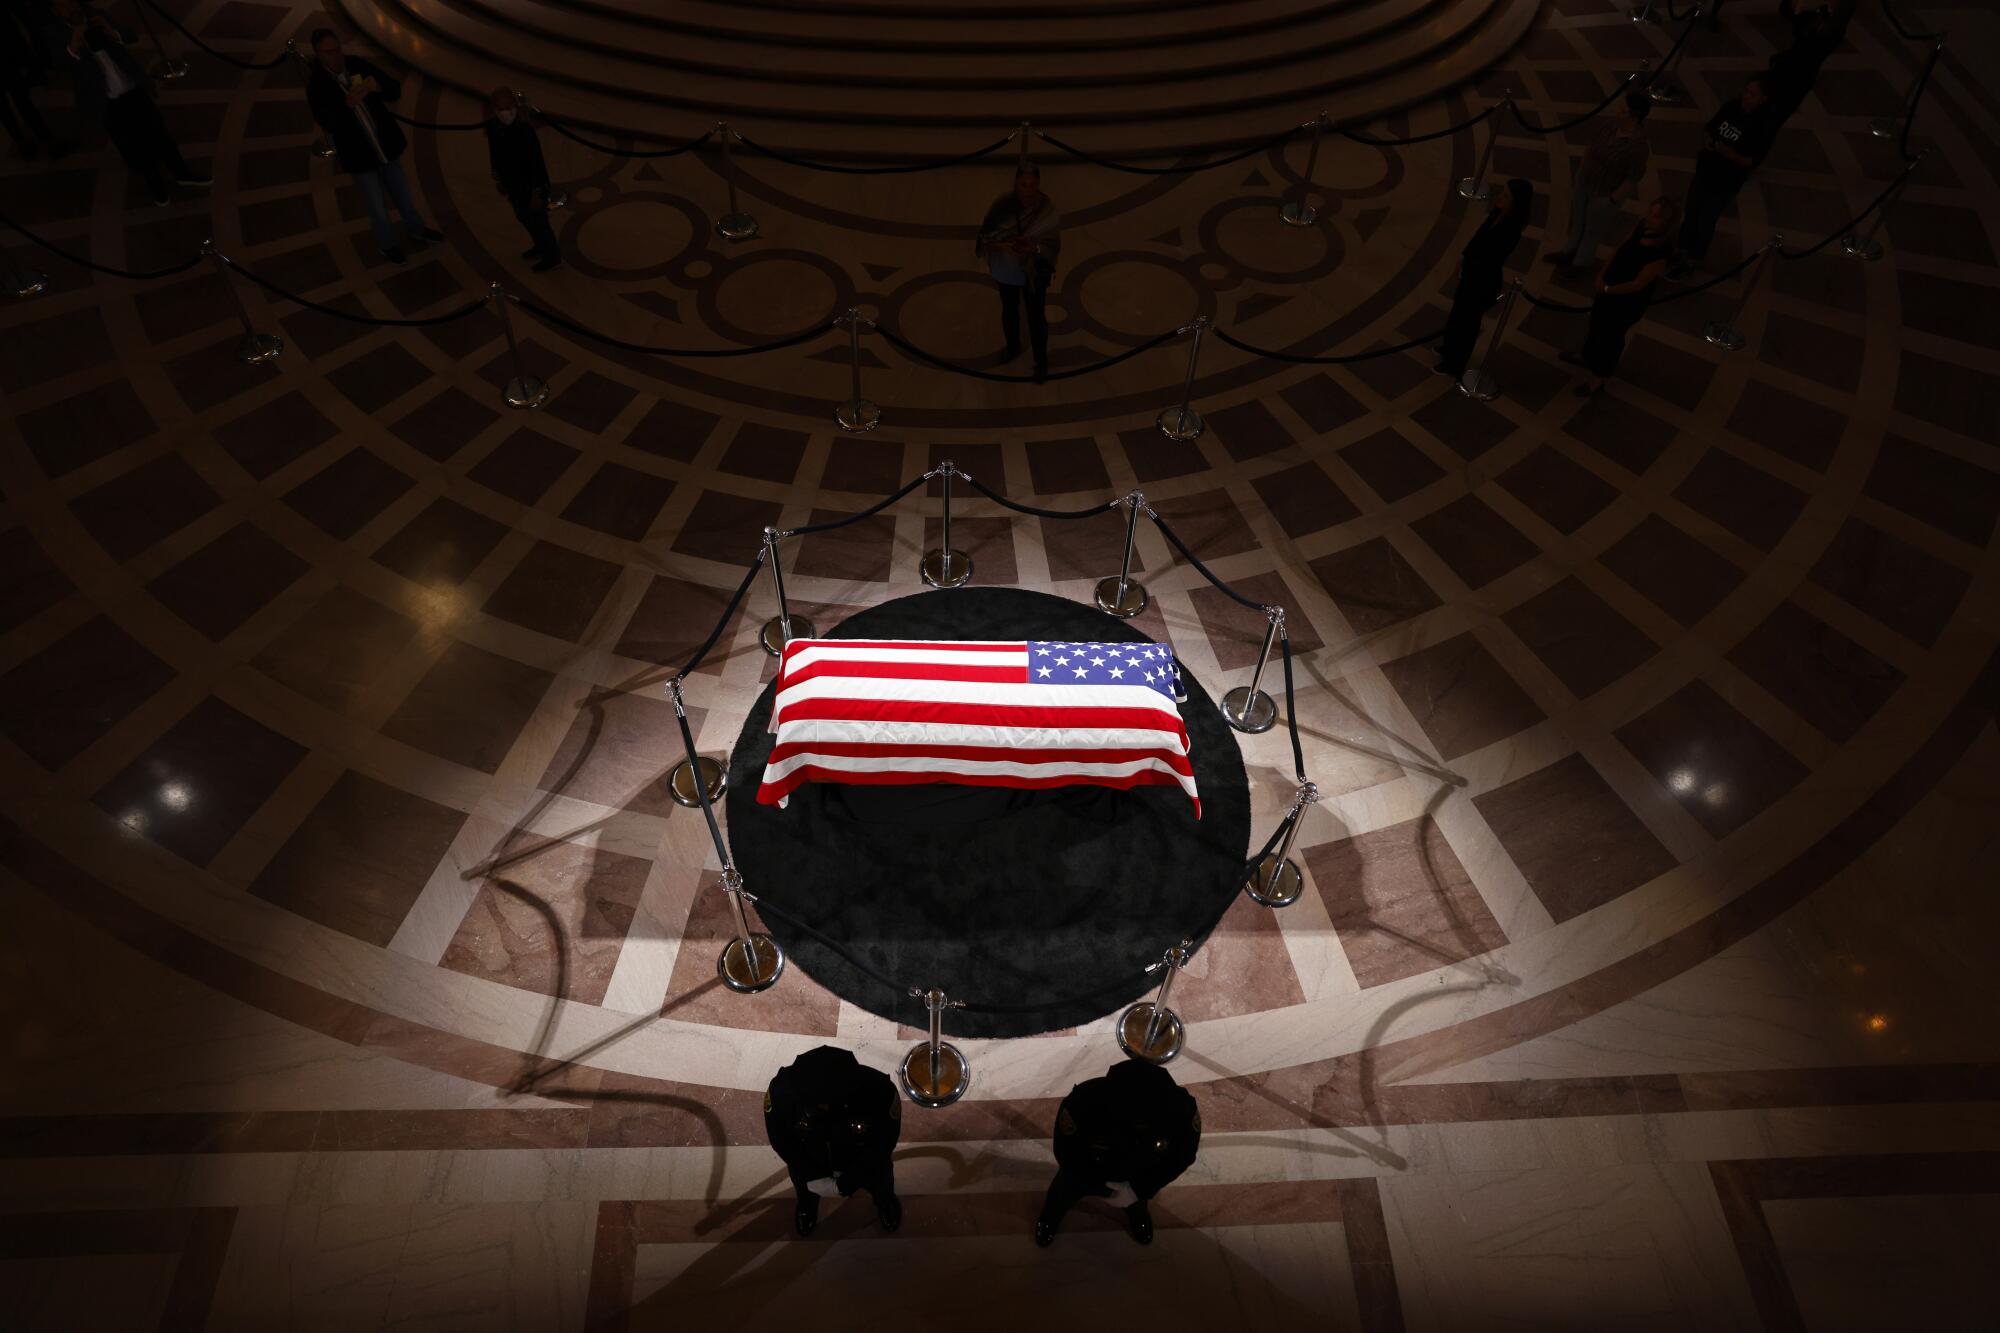 A flag-covered coffin on a dais.